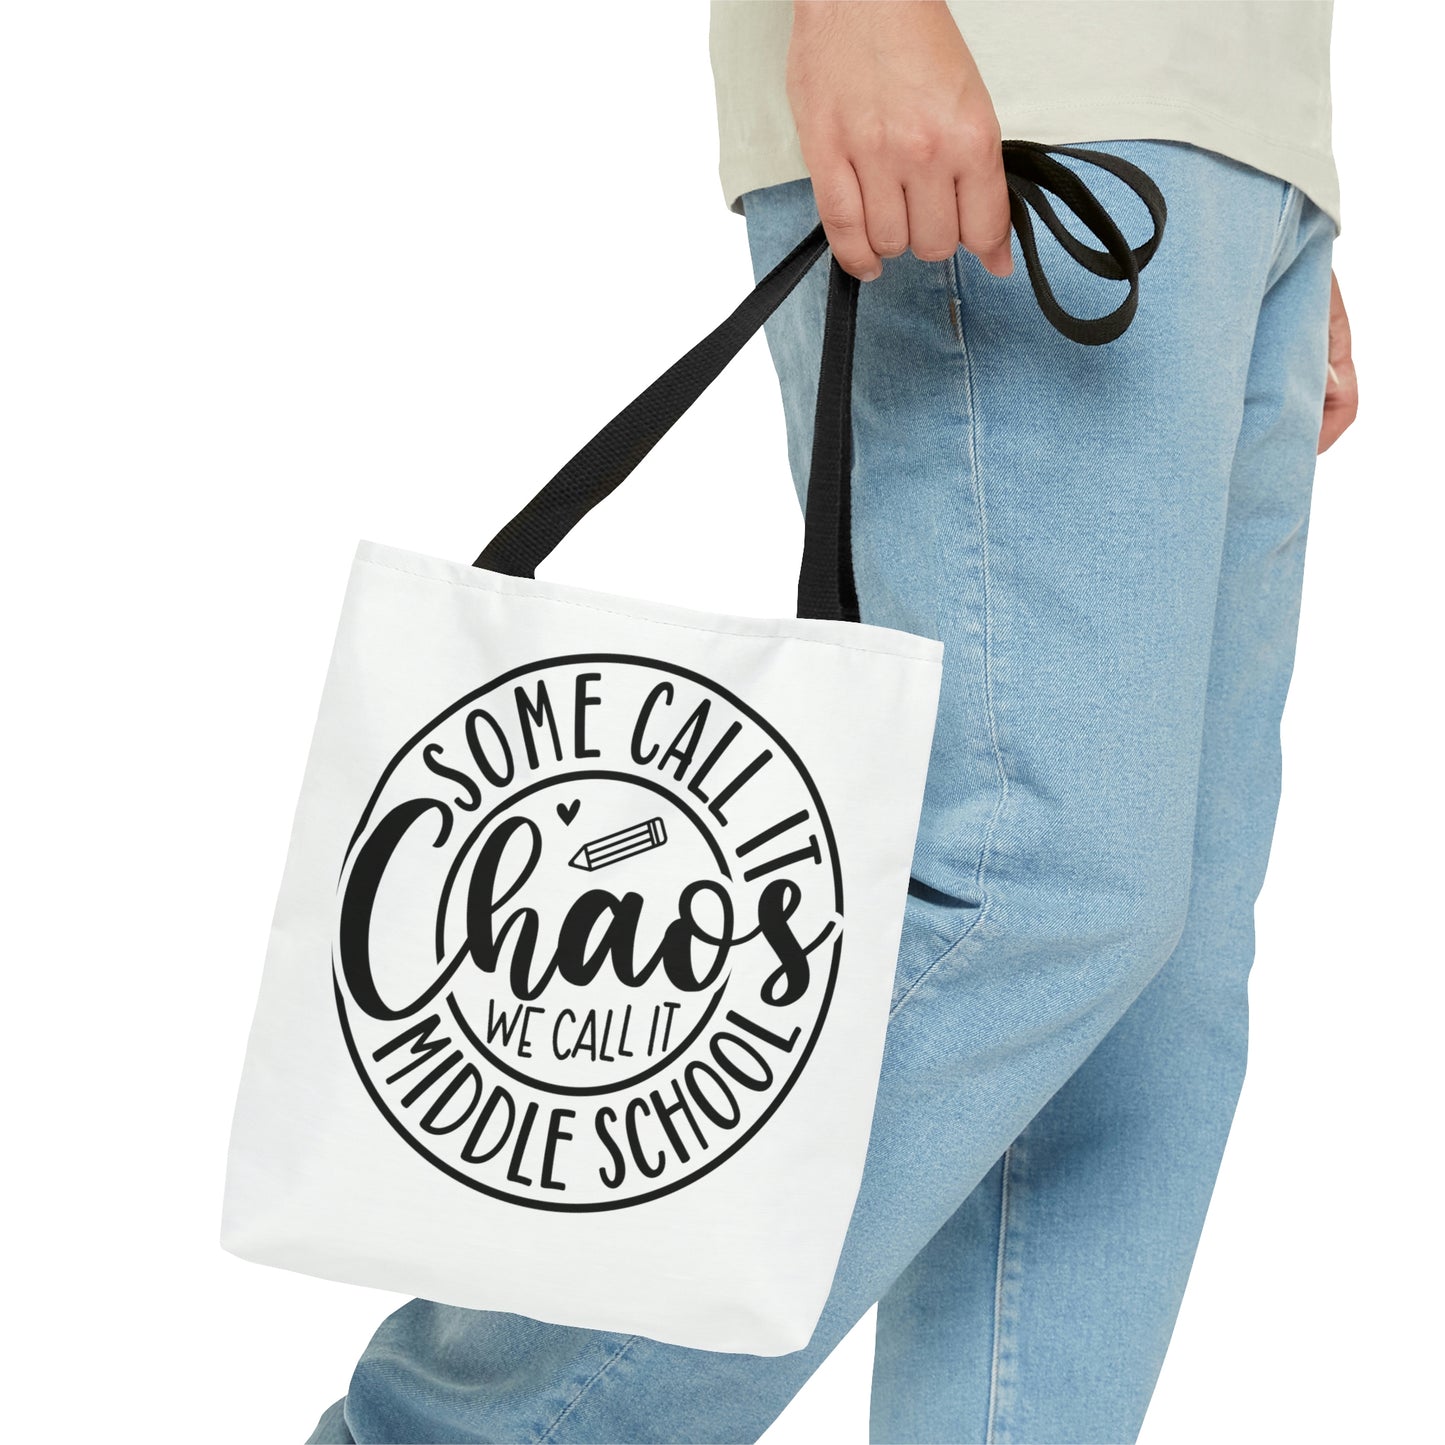 "Some call it Chaos, We call it middle school" Tote Bag